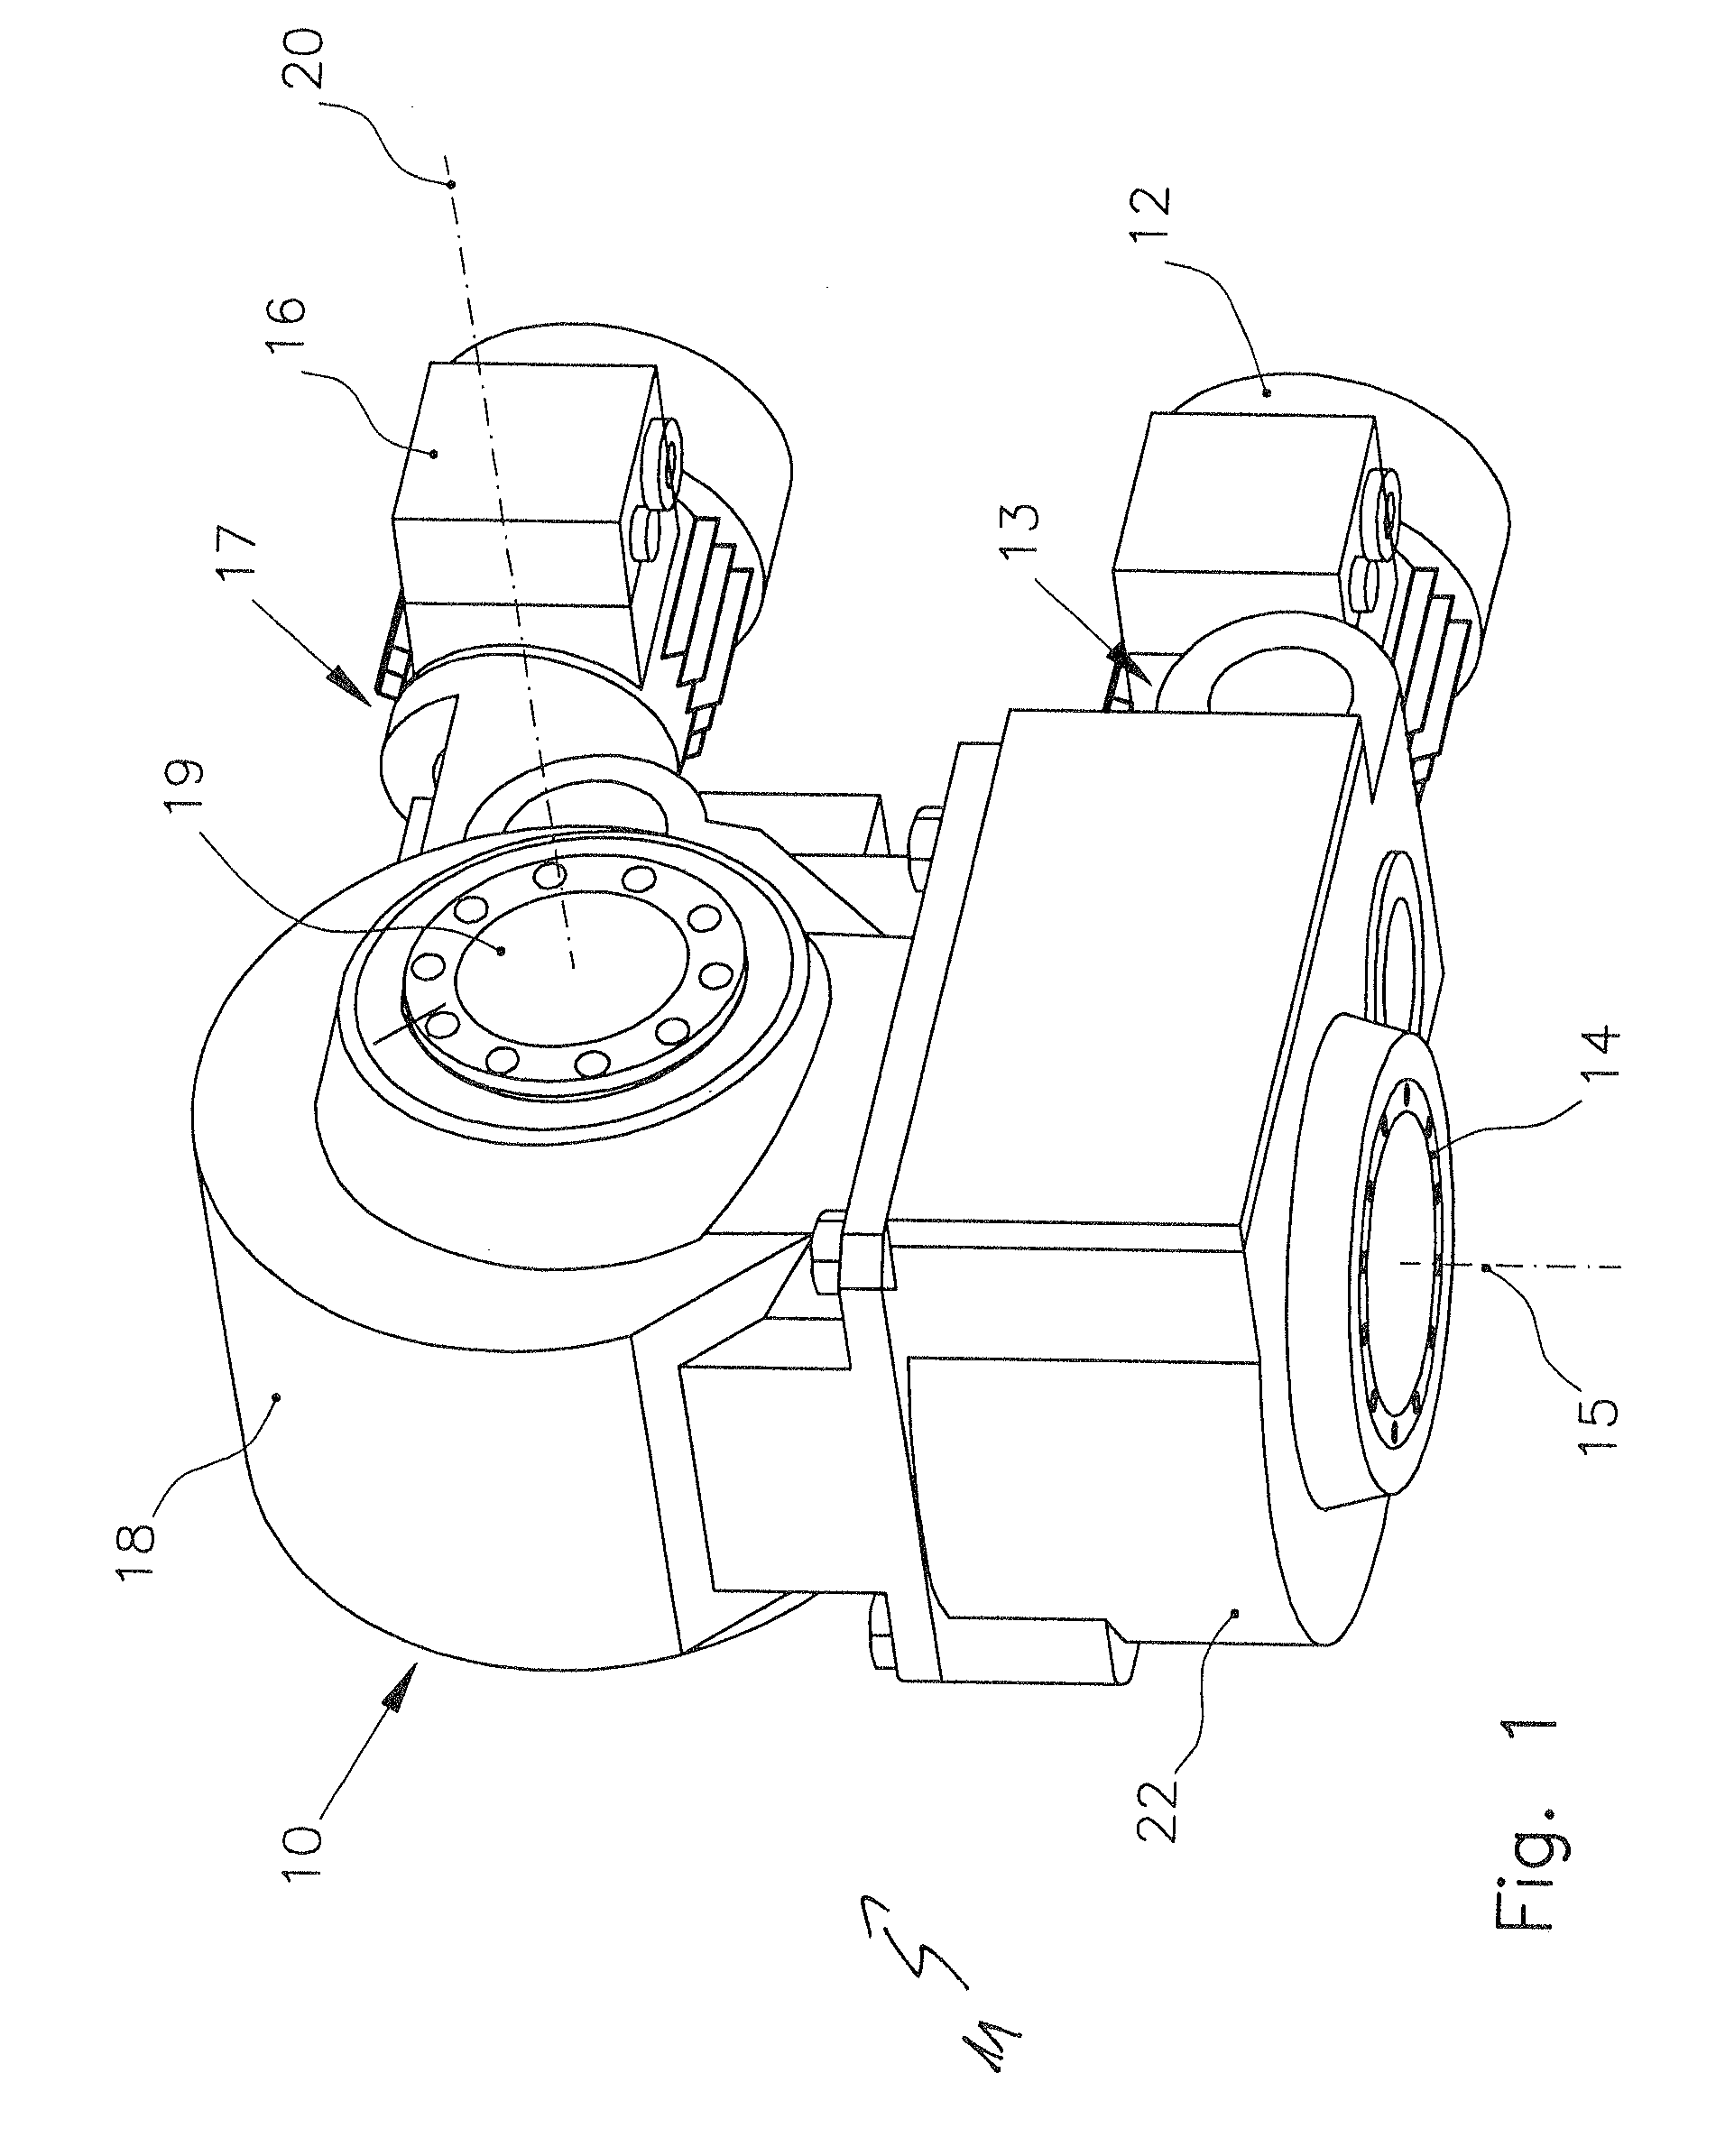 Two-axle drive system